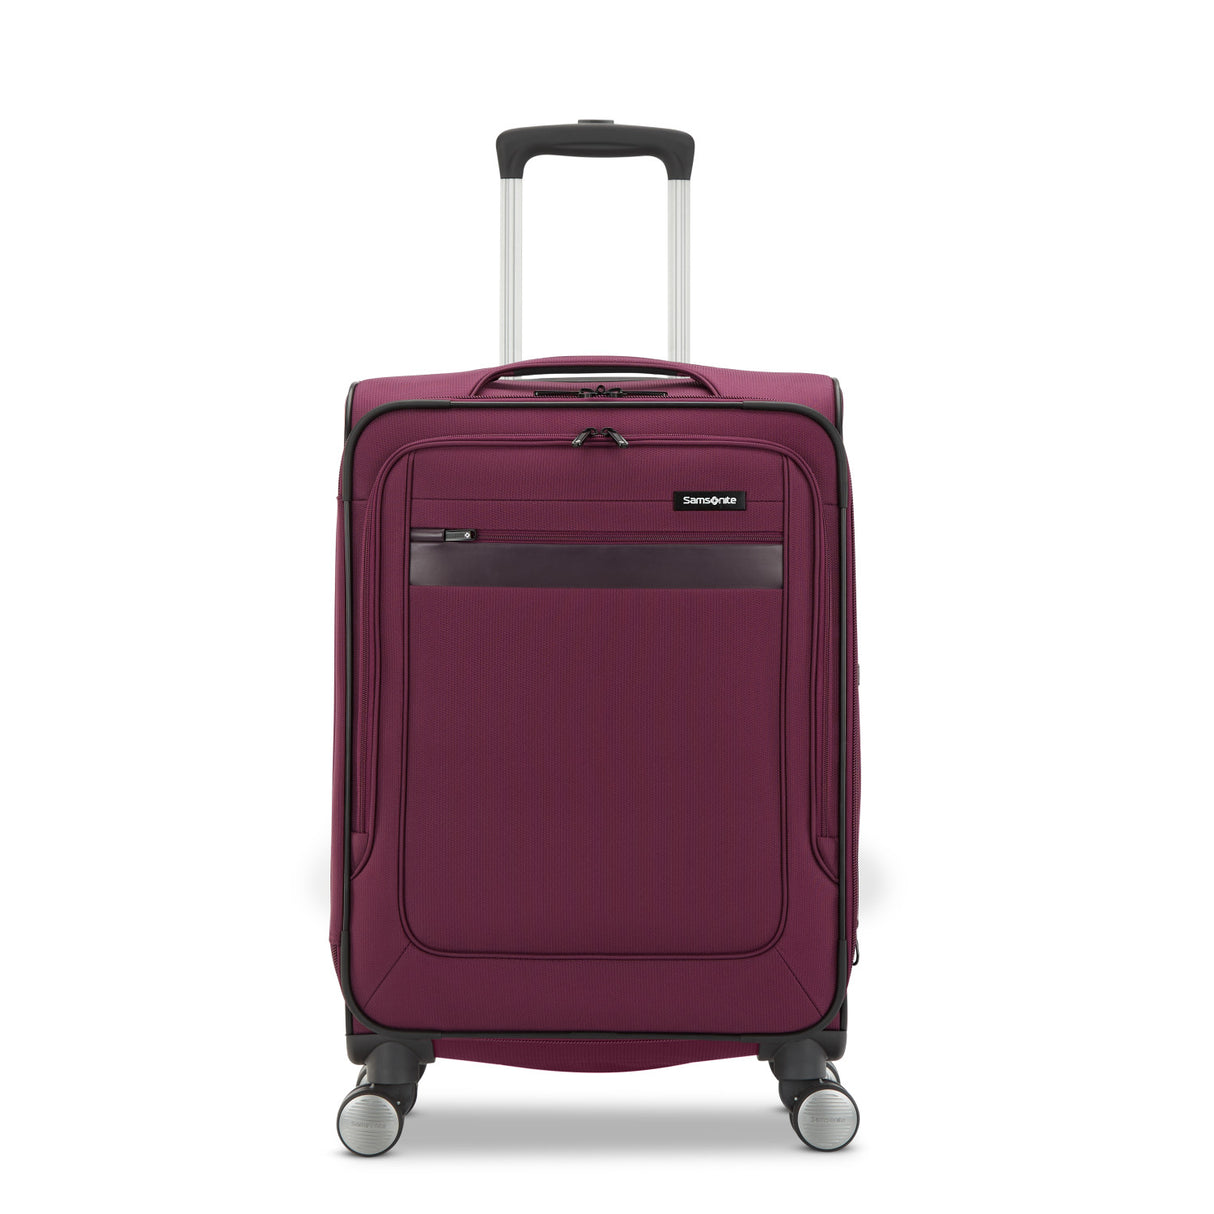 Products Samsonite Ascella 3.0 Carry-on Expandable Spinner , , aif7xsue8buogjpdnm62